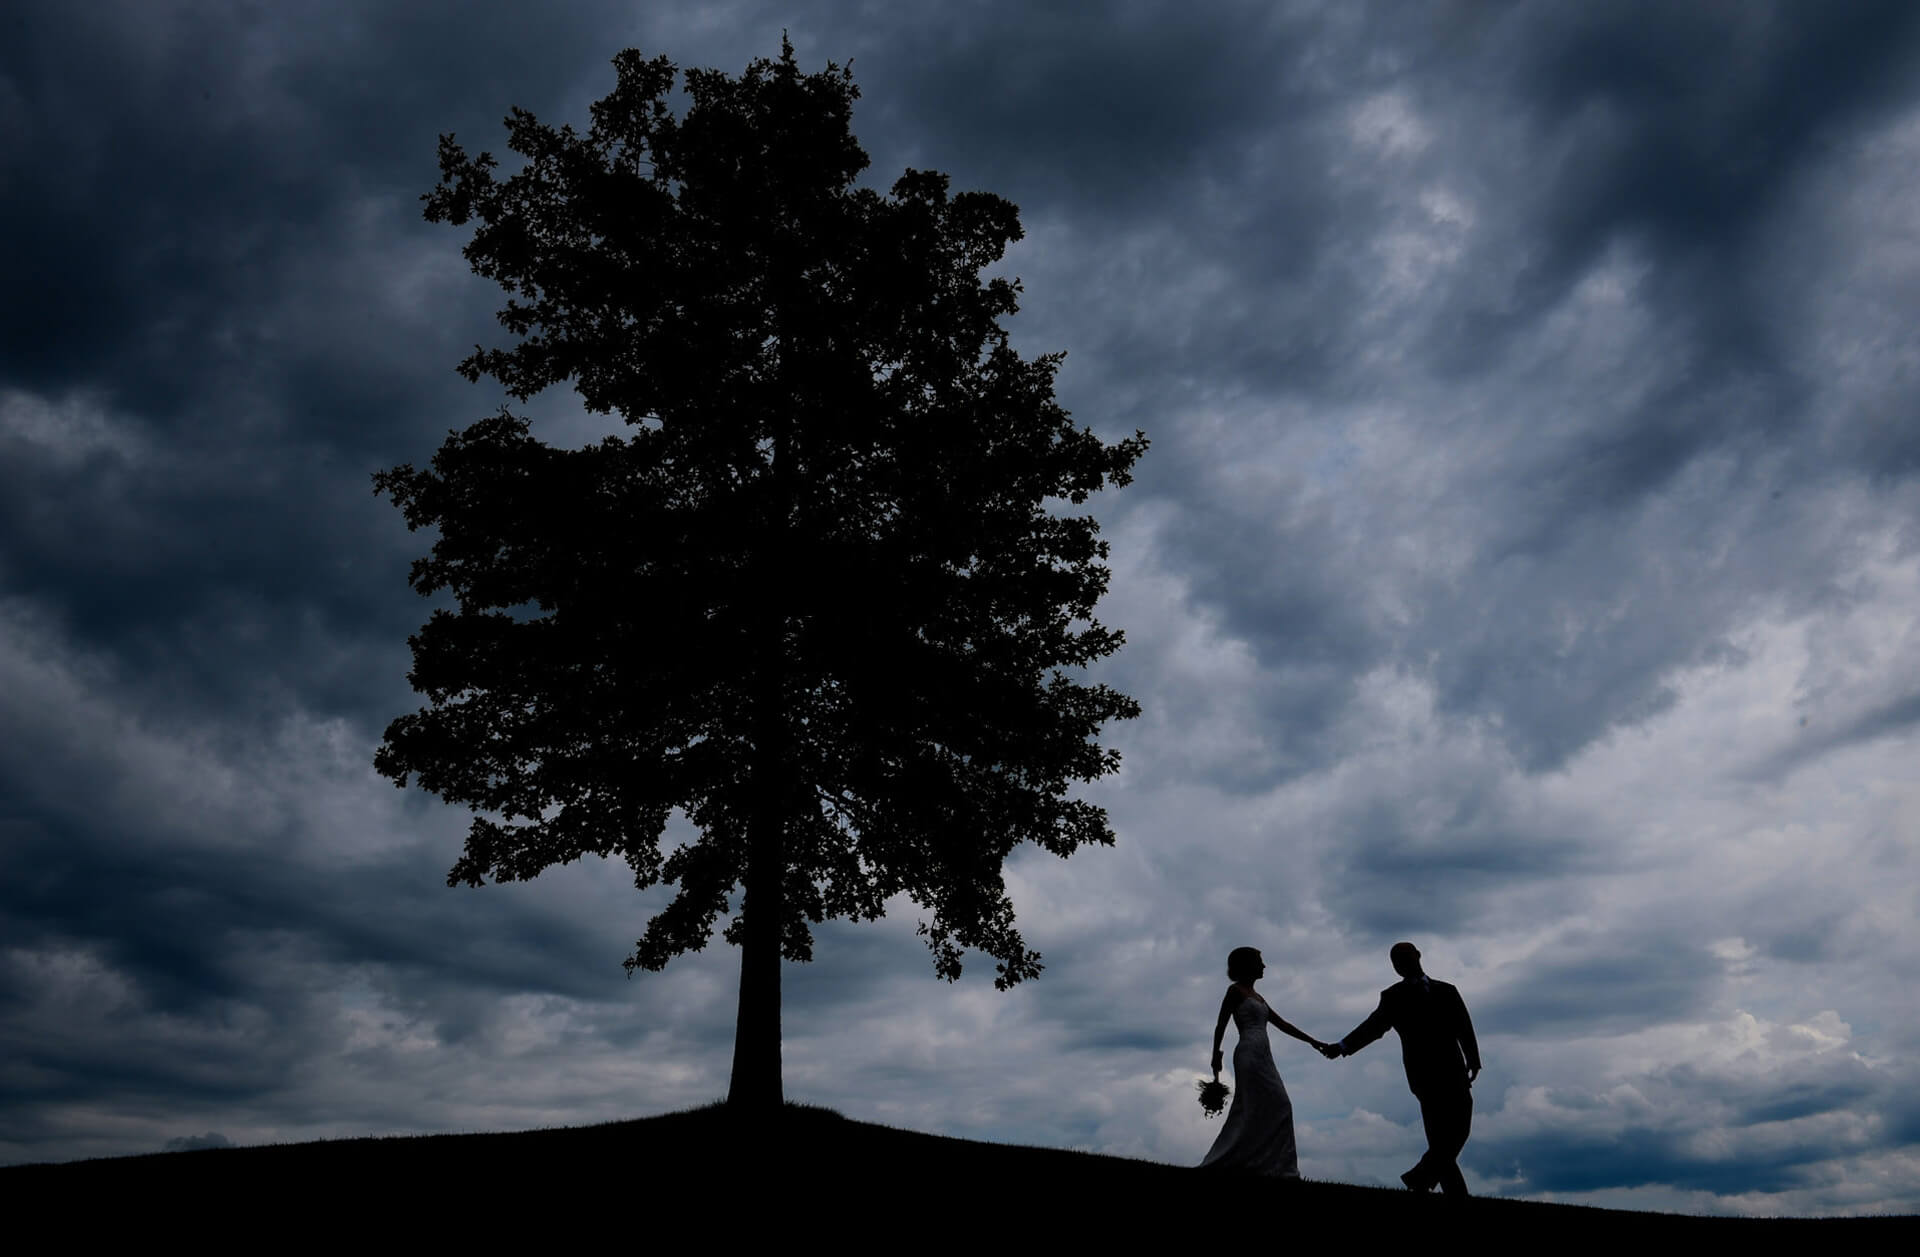 A stormy day made for a cool, dramatic wedding portrait of the bride and groom at the Coyote Preserve in metro Detroit, Michigan.